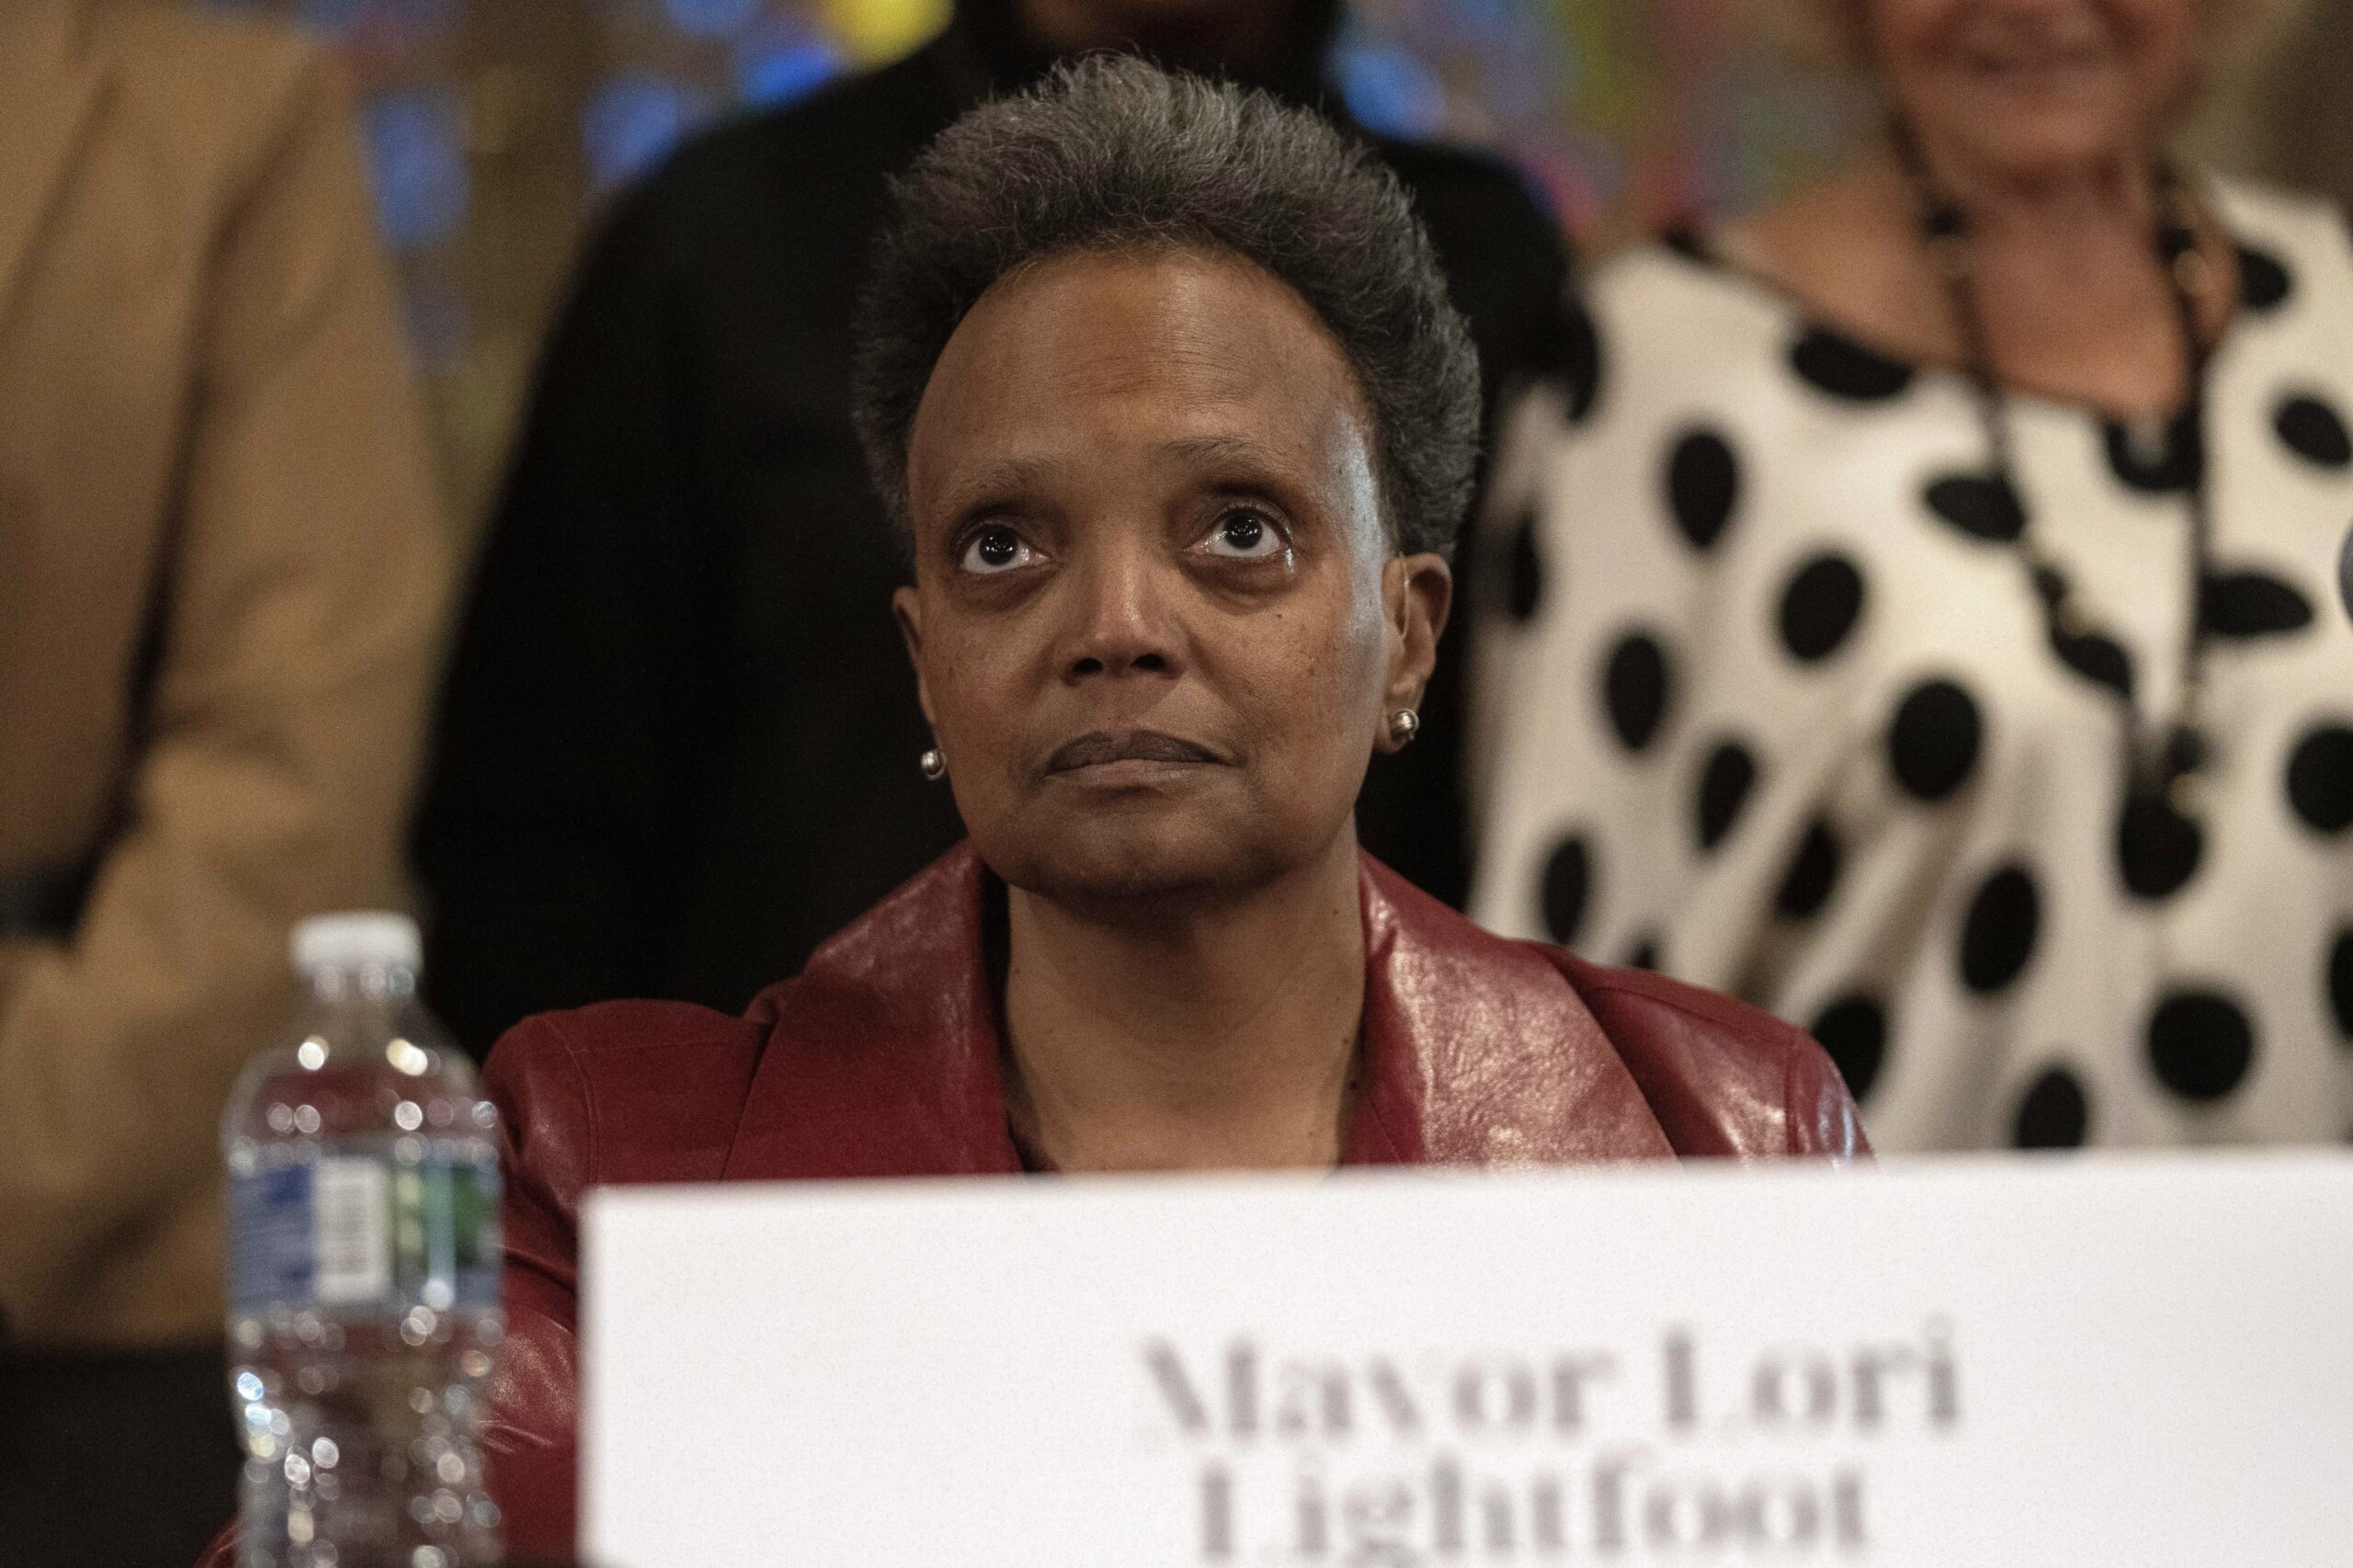 Chicago Mayor Lori Lightfoot, who made history as 1st Black woman and